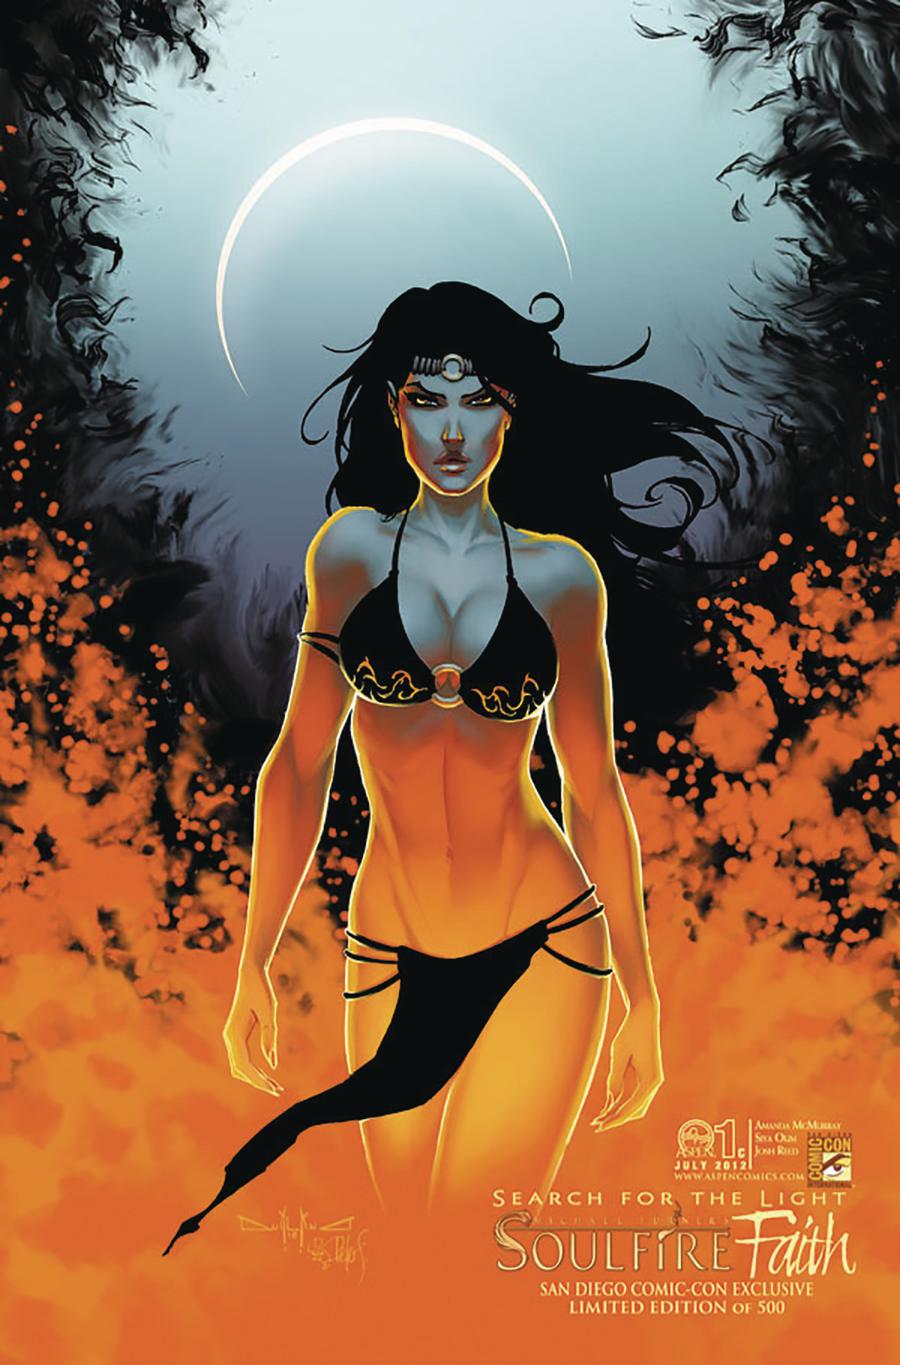 Soulfire Faith #1 Cover C SDCC 2012 Exclusive Limited Edition Pasquale Qualano Variant Cover